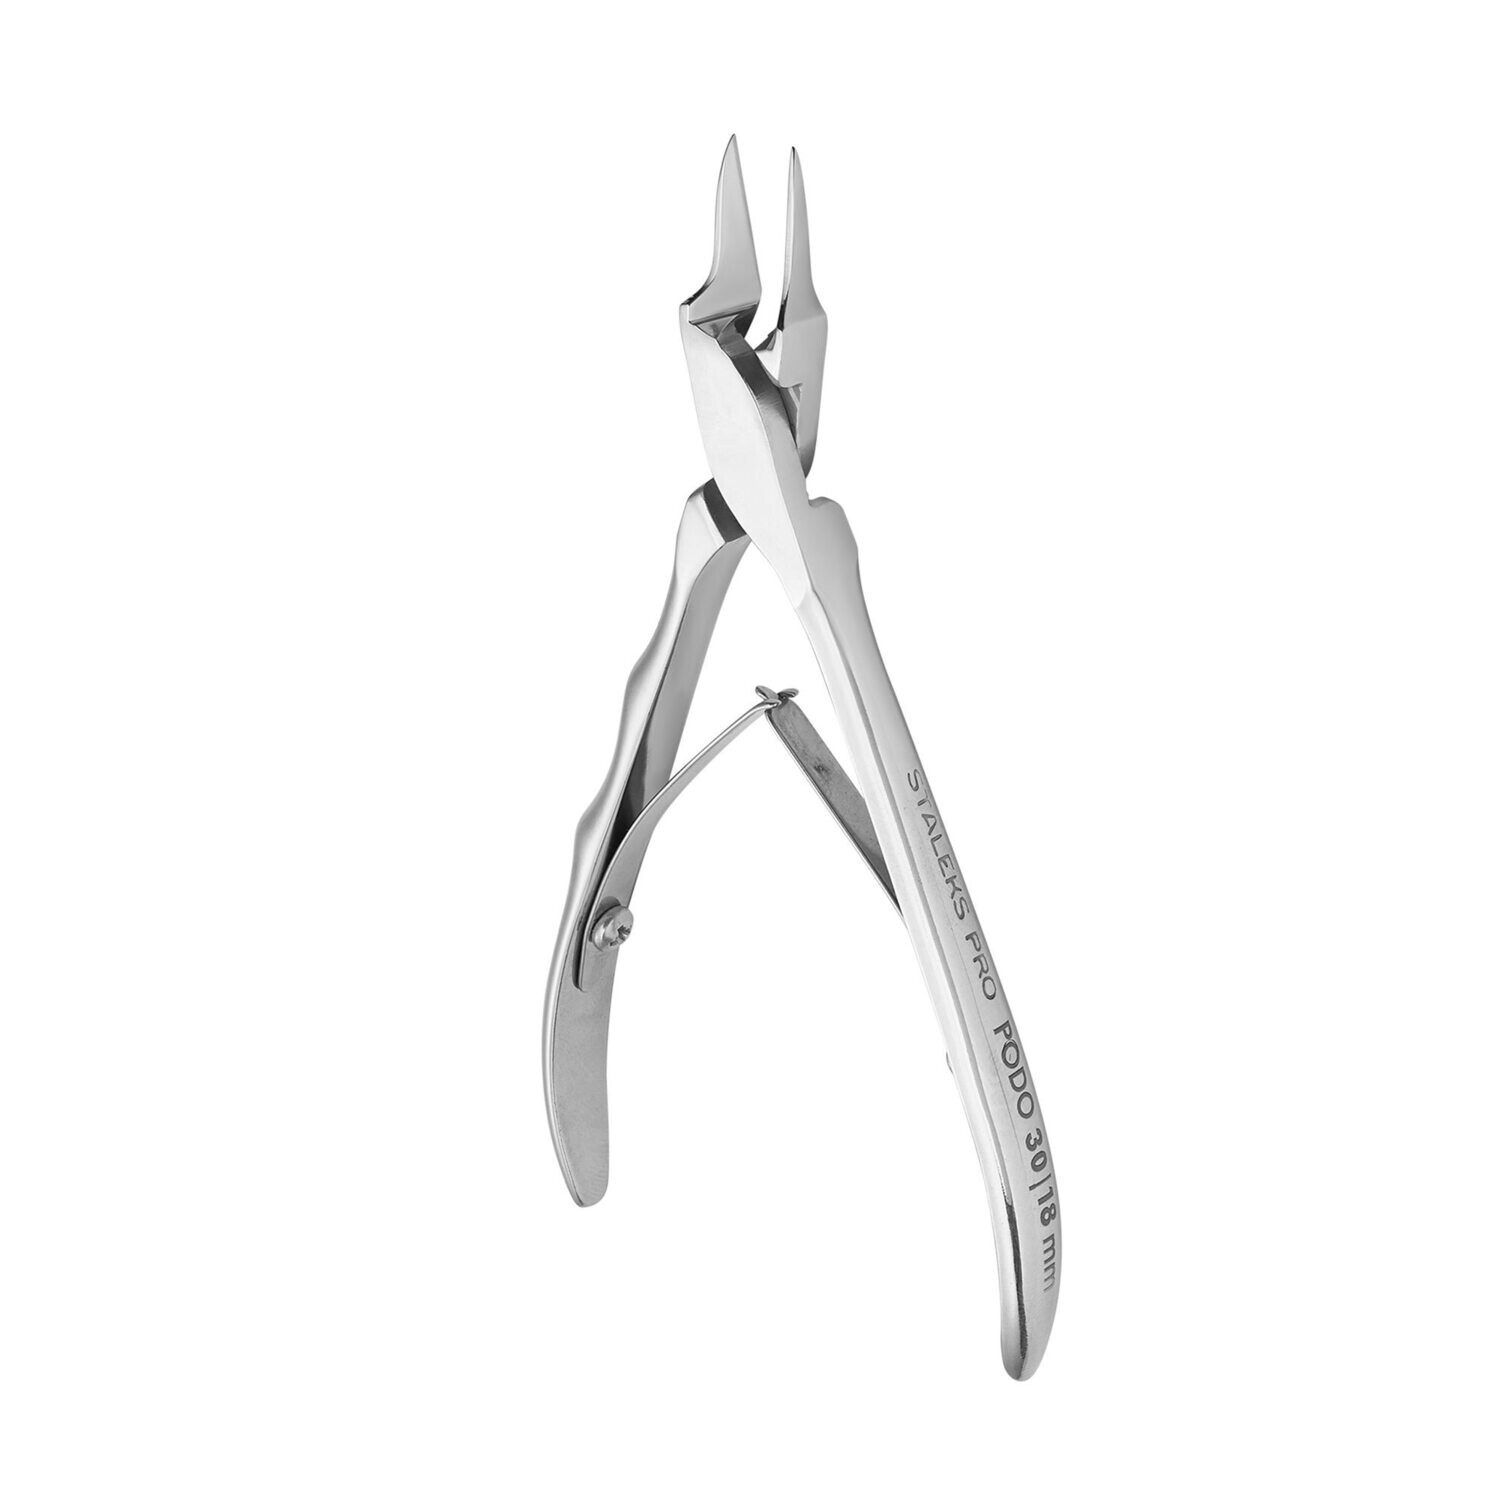 Nippers for ingrown nails Staleks Pro Podo 30, 18 mm